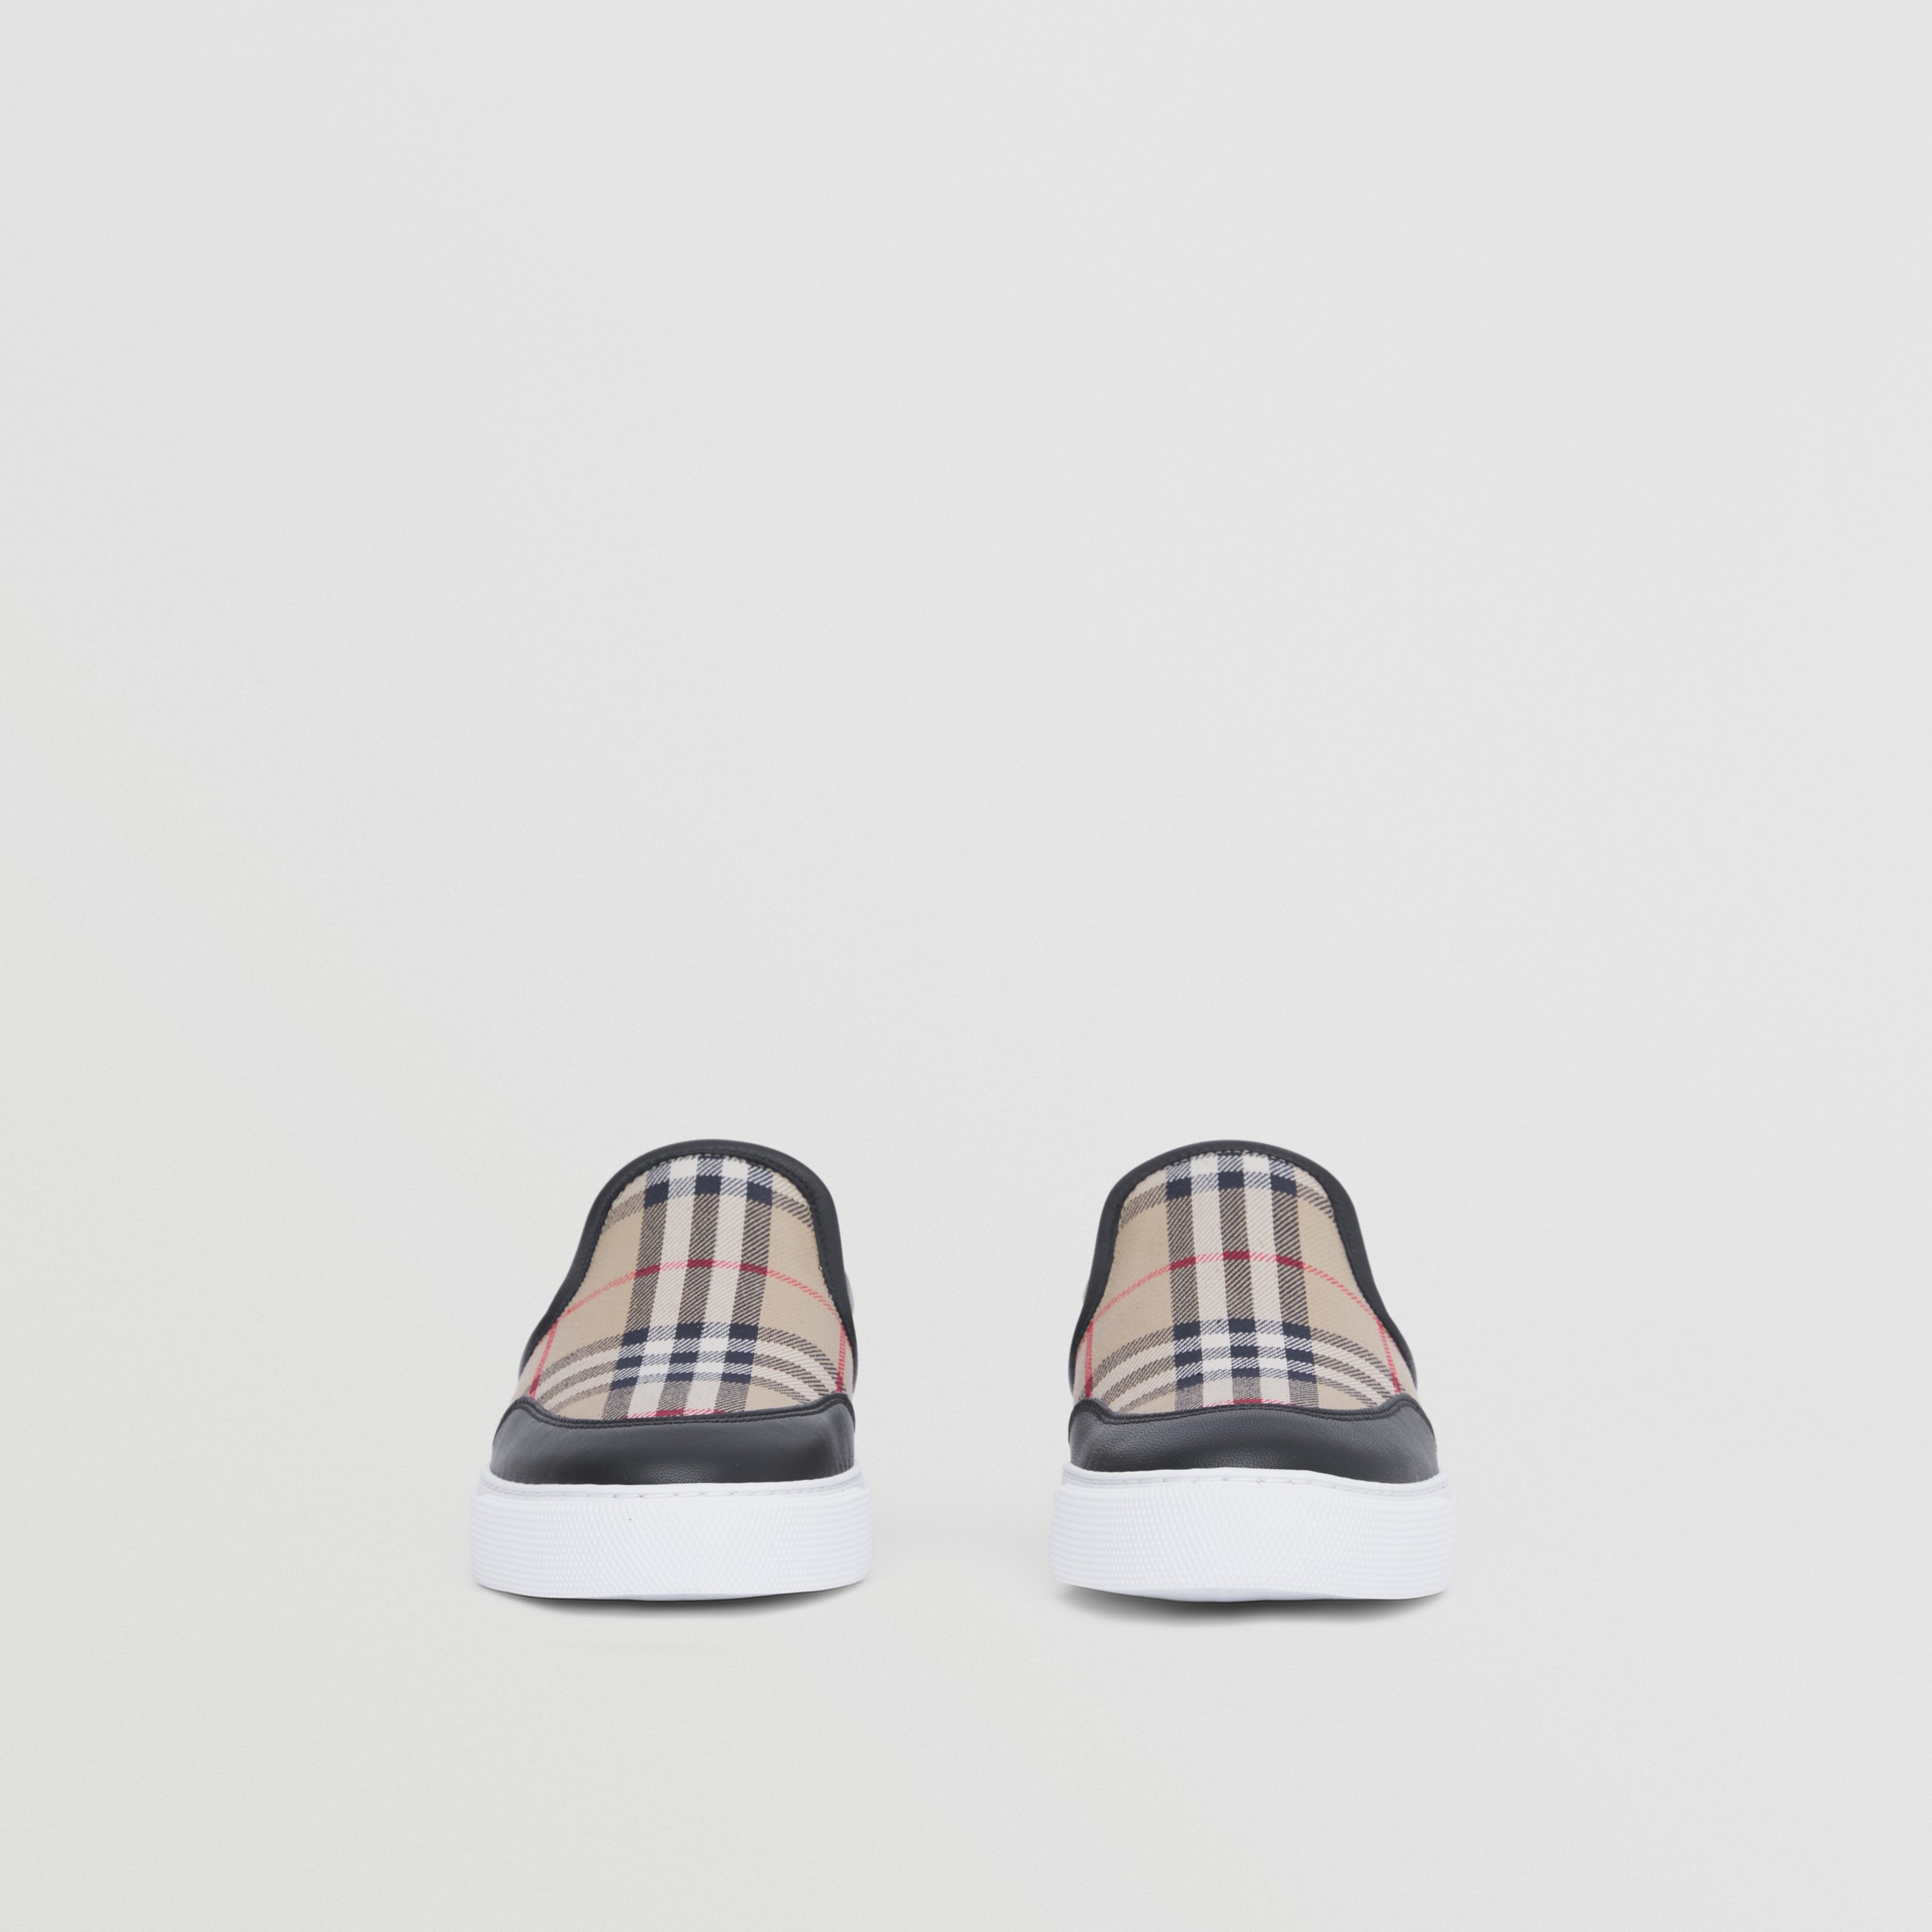 At deaktivere Landbrugs Quagmire Leather and Vintage Check Slip-on Sneakers in Black/archive Beige - Women |  Burberry